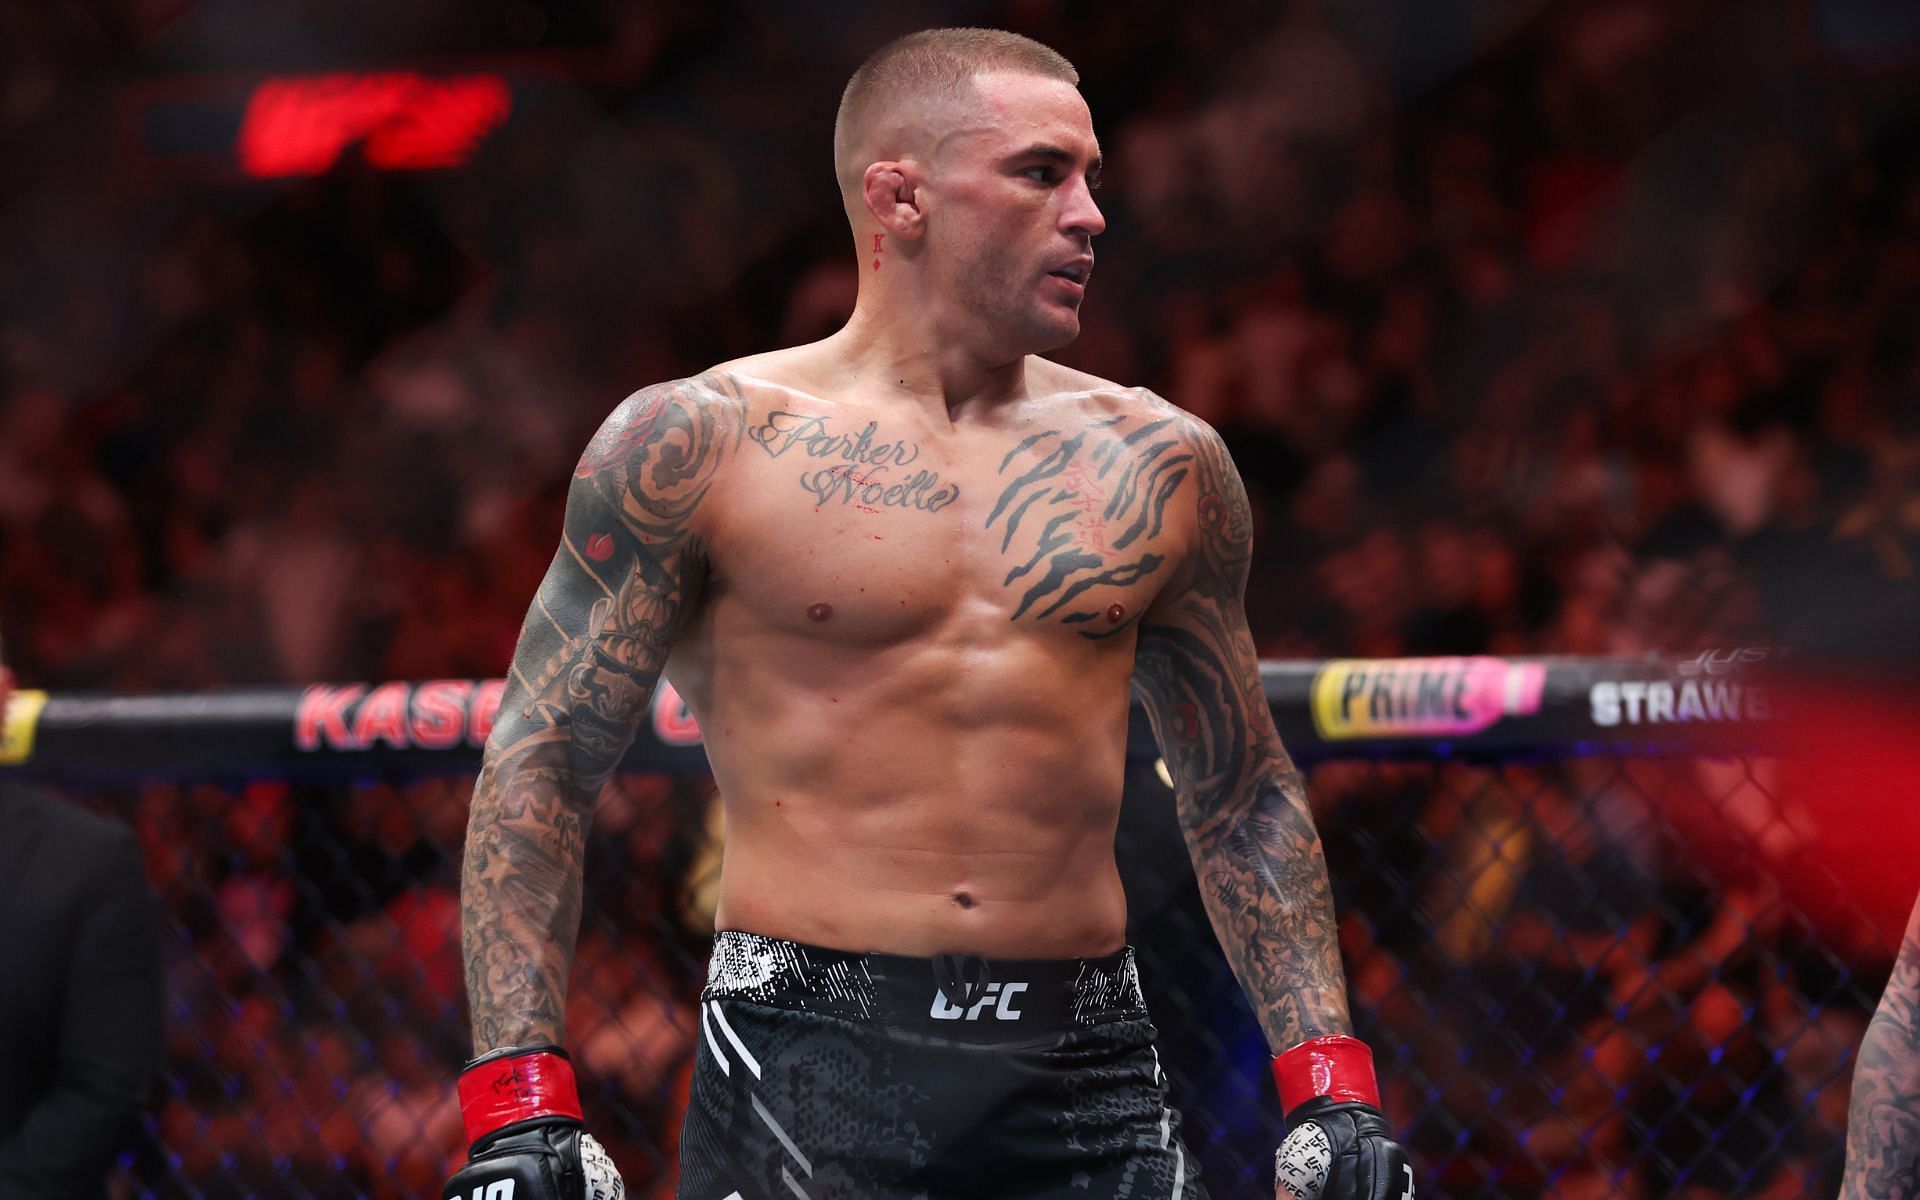 Dustin Poirier is a former interim UFC lightweight champion and is regarded as one of the best MMA lightweights in the world today [Image courtesy: Getty Images]